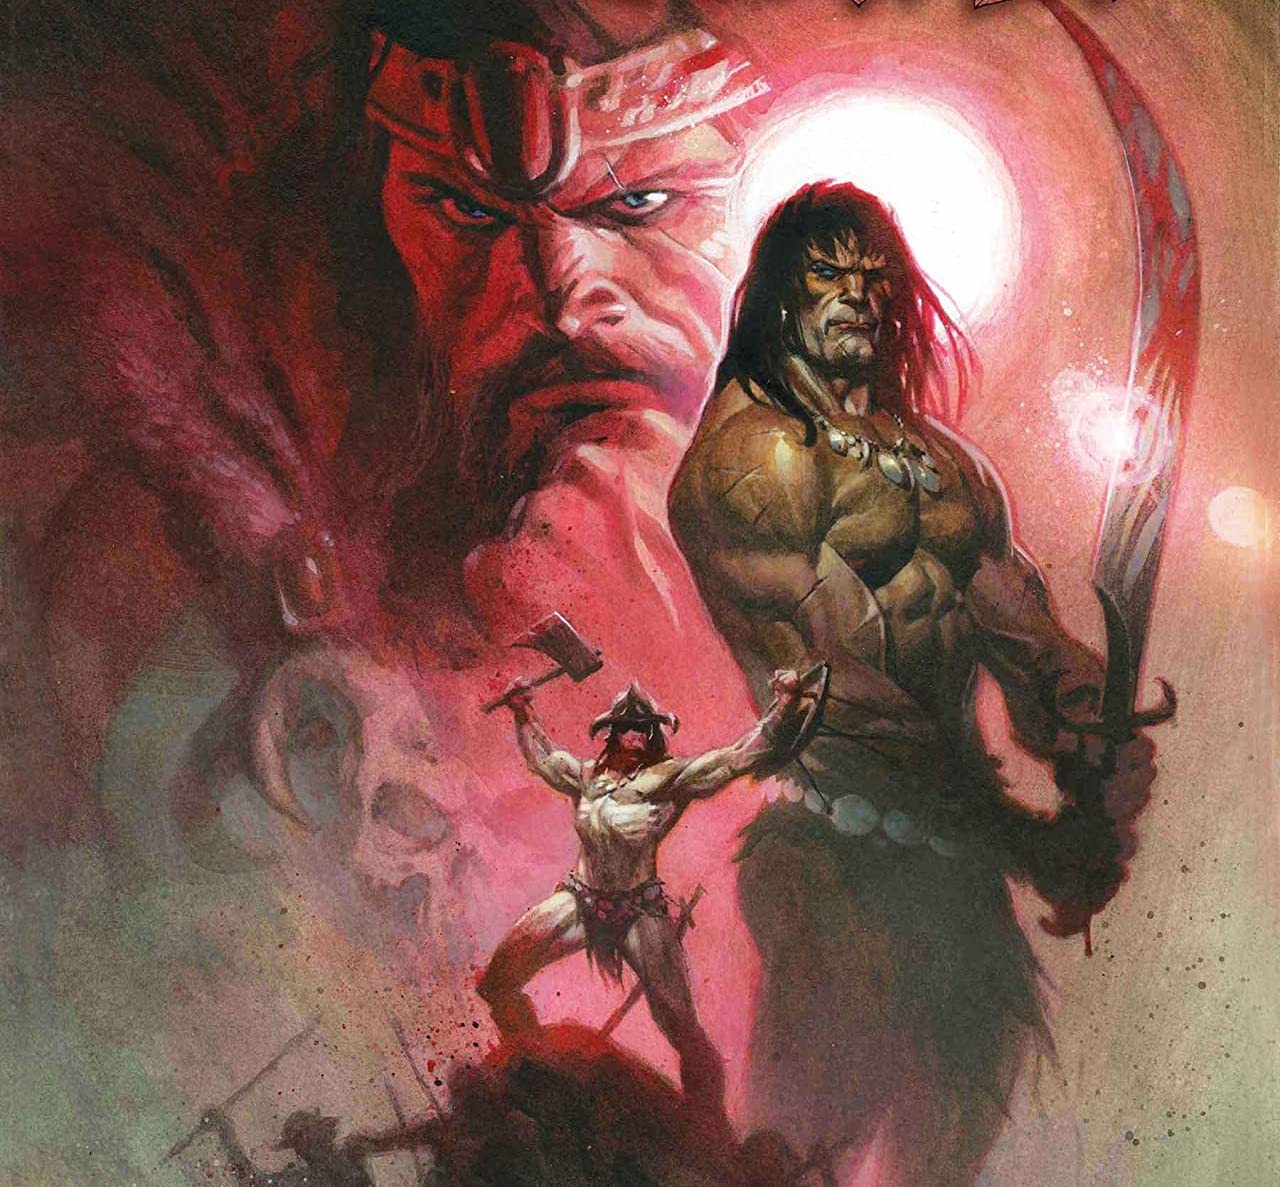 'King-Size Conan' #1 review: A great celebration of the adventurer-warrior